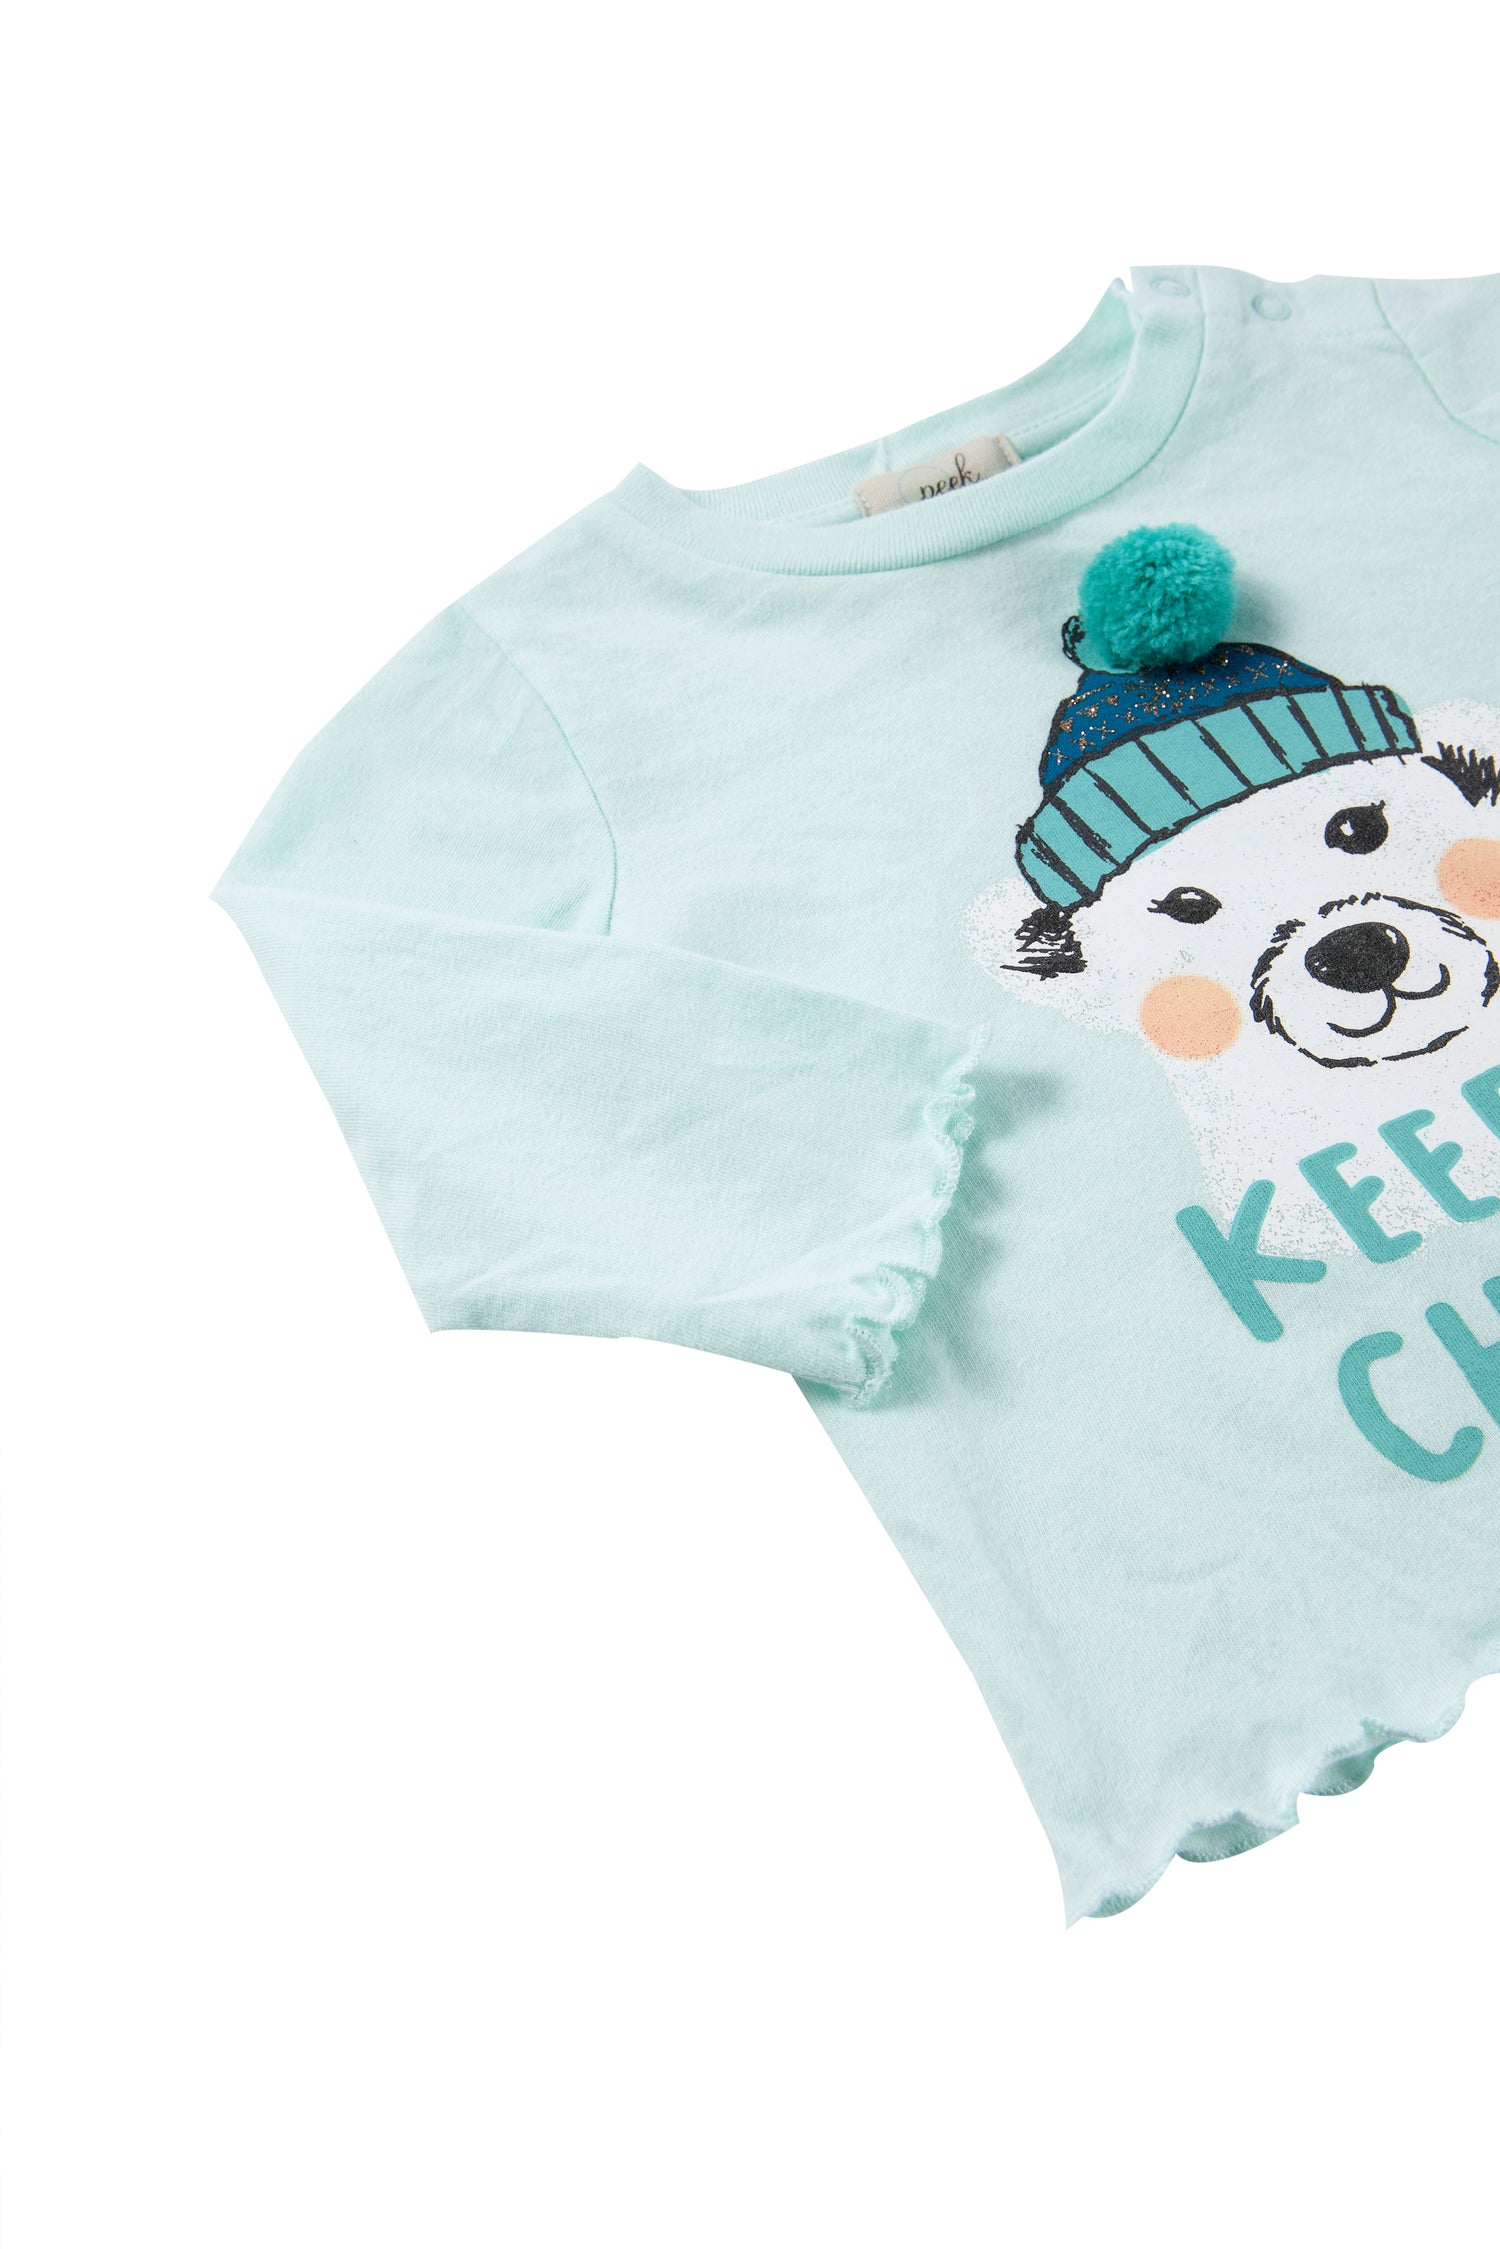 Close up view of white and blue polar bear themed shirt with "keep it chilly" written